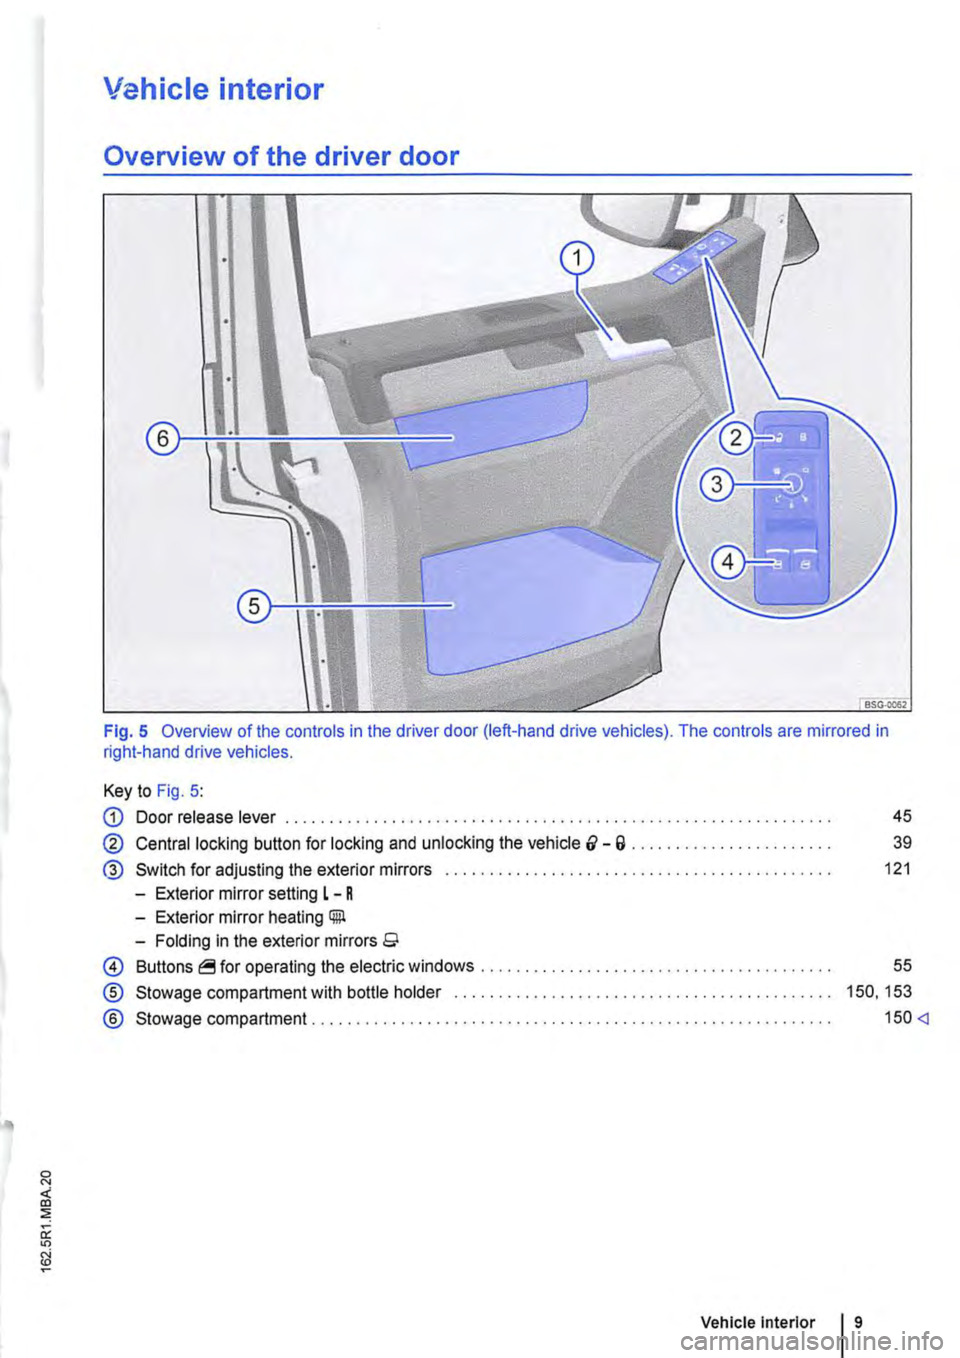 VOLKSWAGEN TRANSPORTER 2019  Owners Manual Vehicle interior 
Overview of the driver door 
Fig. 5 Overview of the controls in the driver door (left-hand drive vehicles). The controls are mirrored in right-hand drive vehicles. 
Key to Fig. 5: 
G